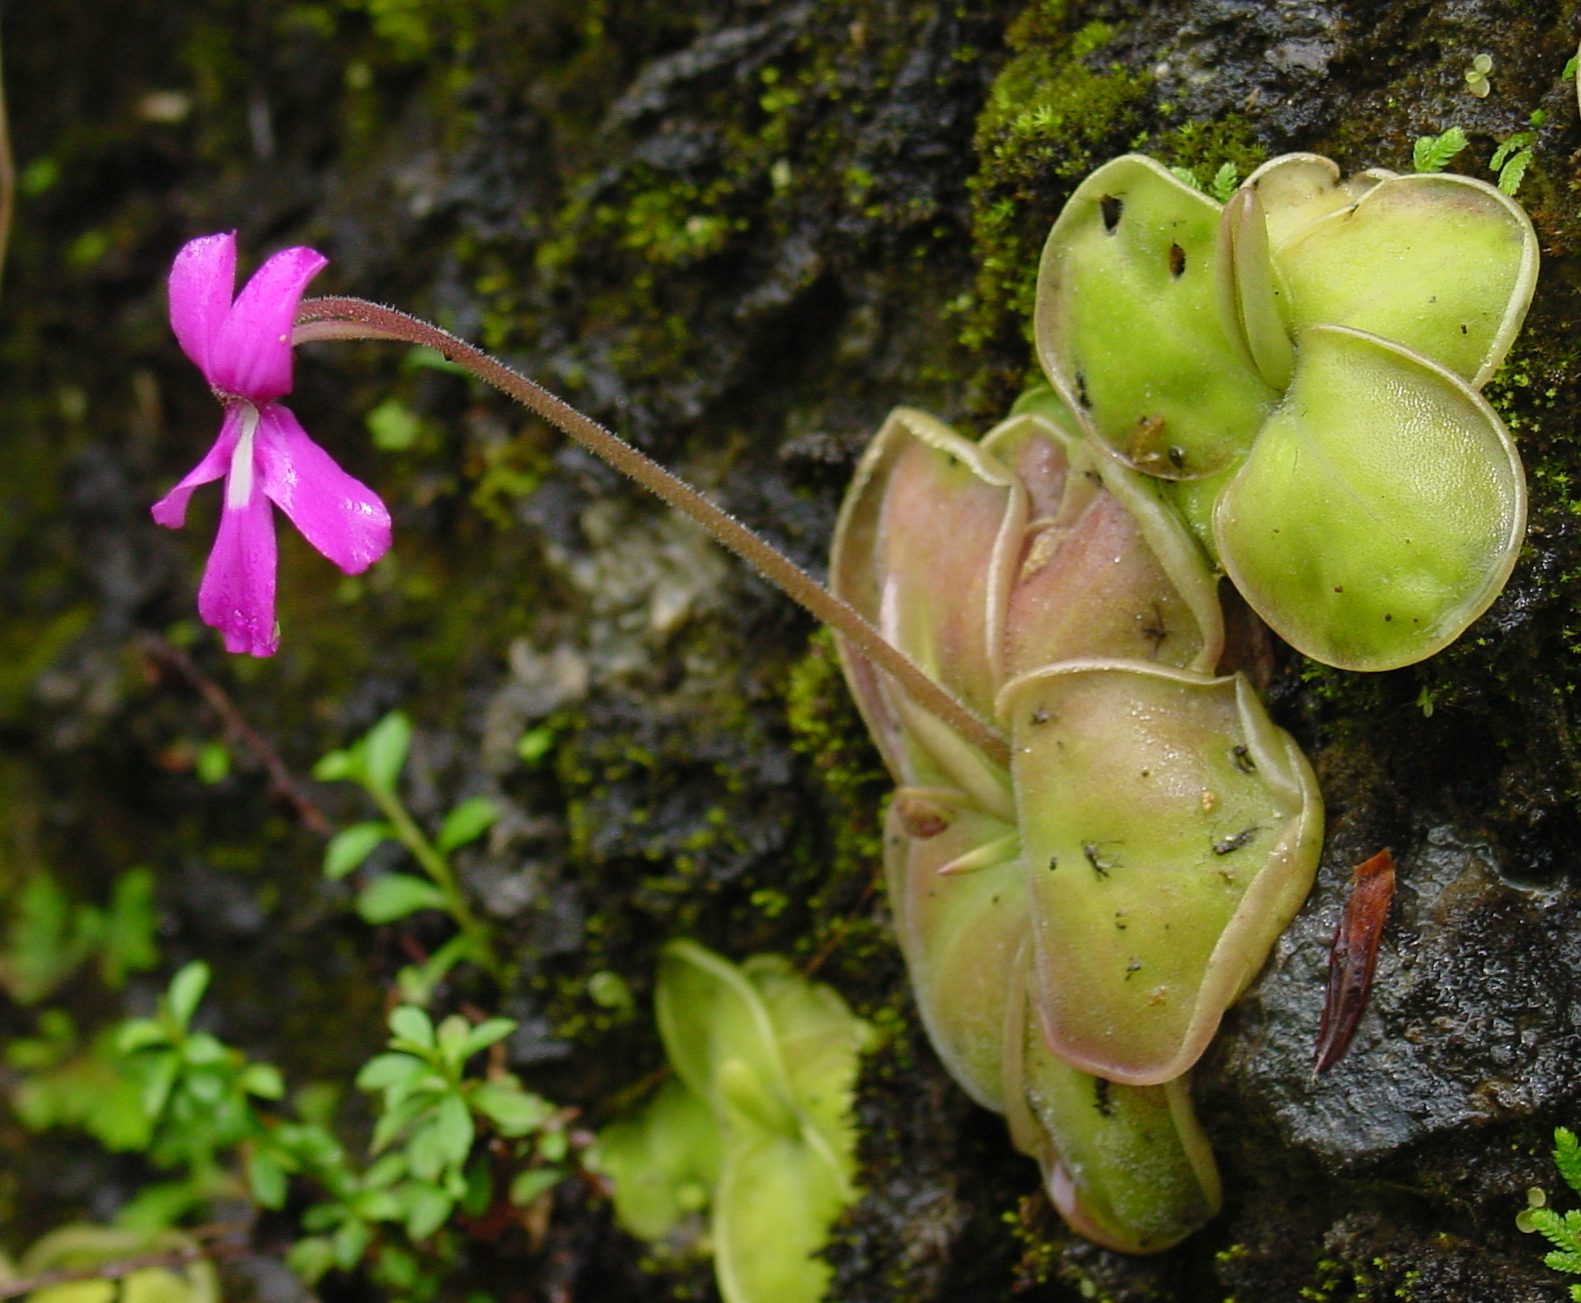 How to grow and care for Pinguicula (Butterworts) carnivorous plants in terrariums